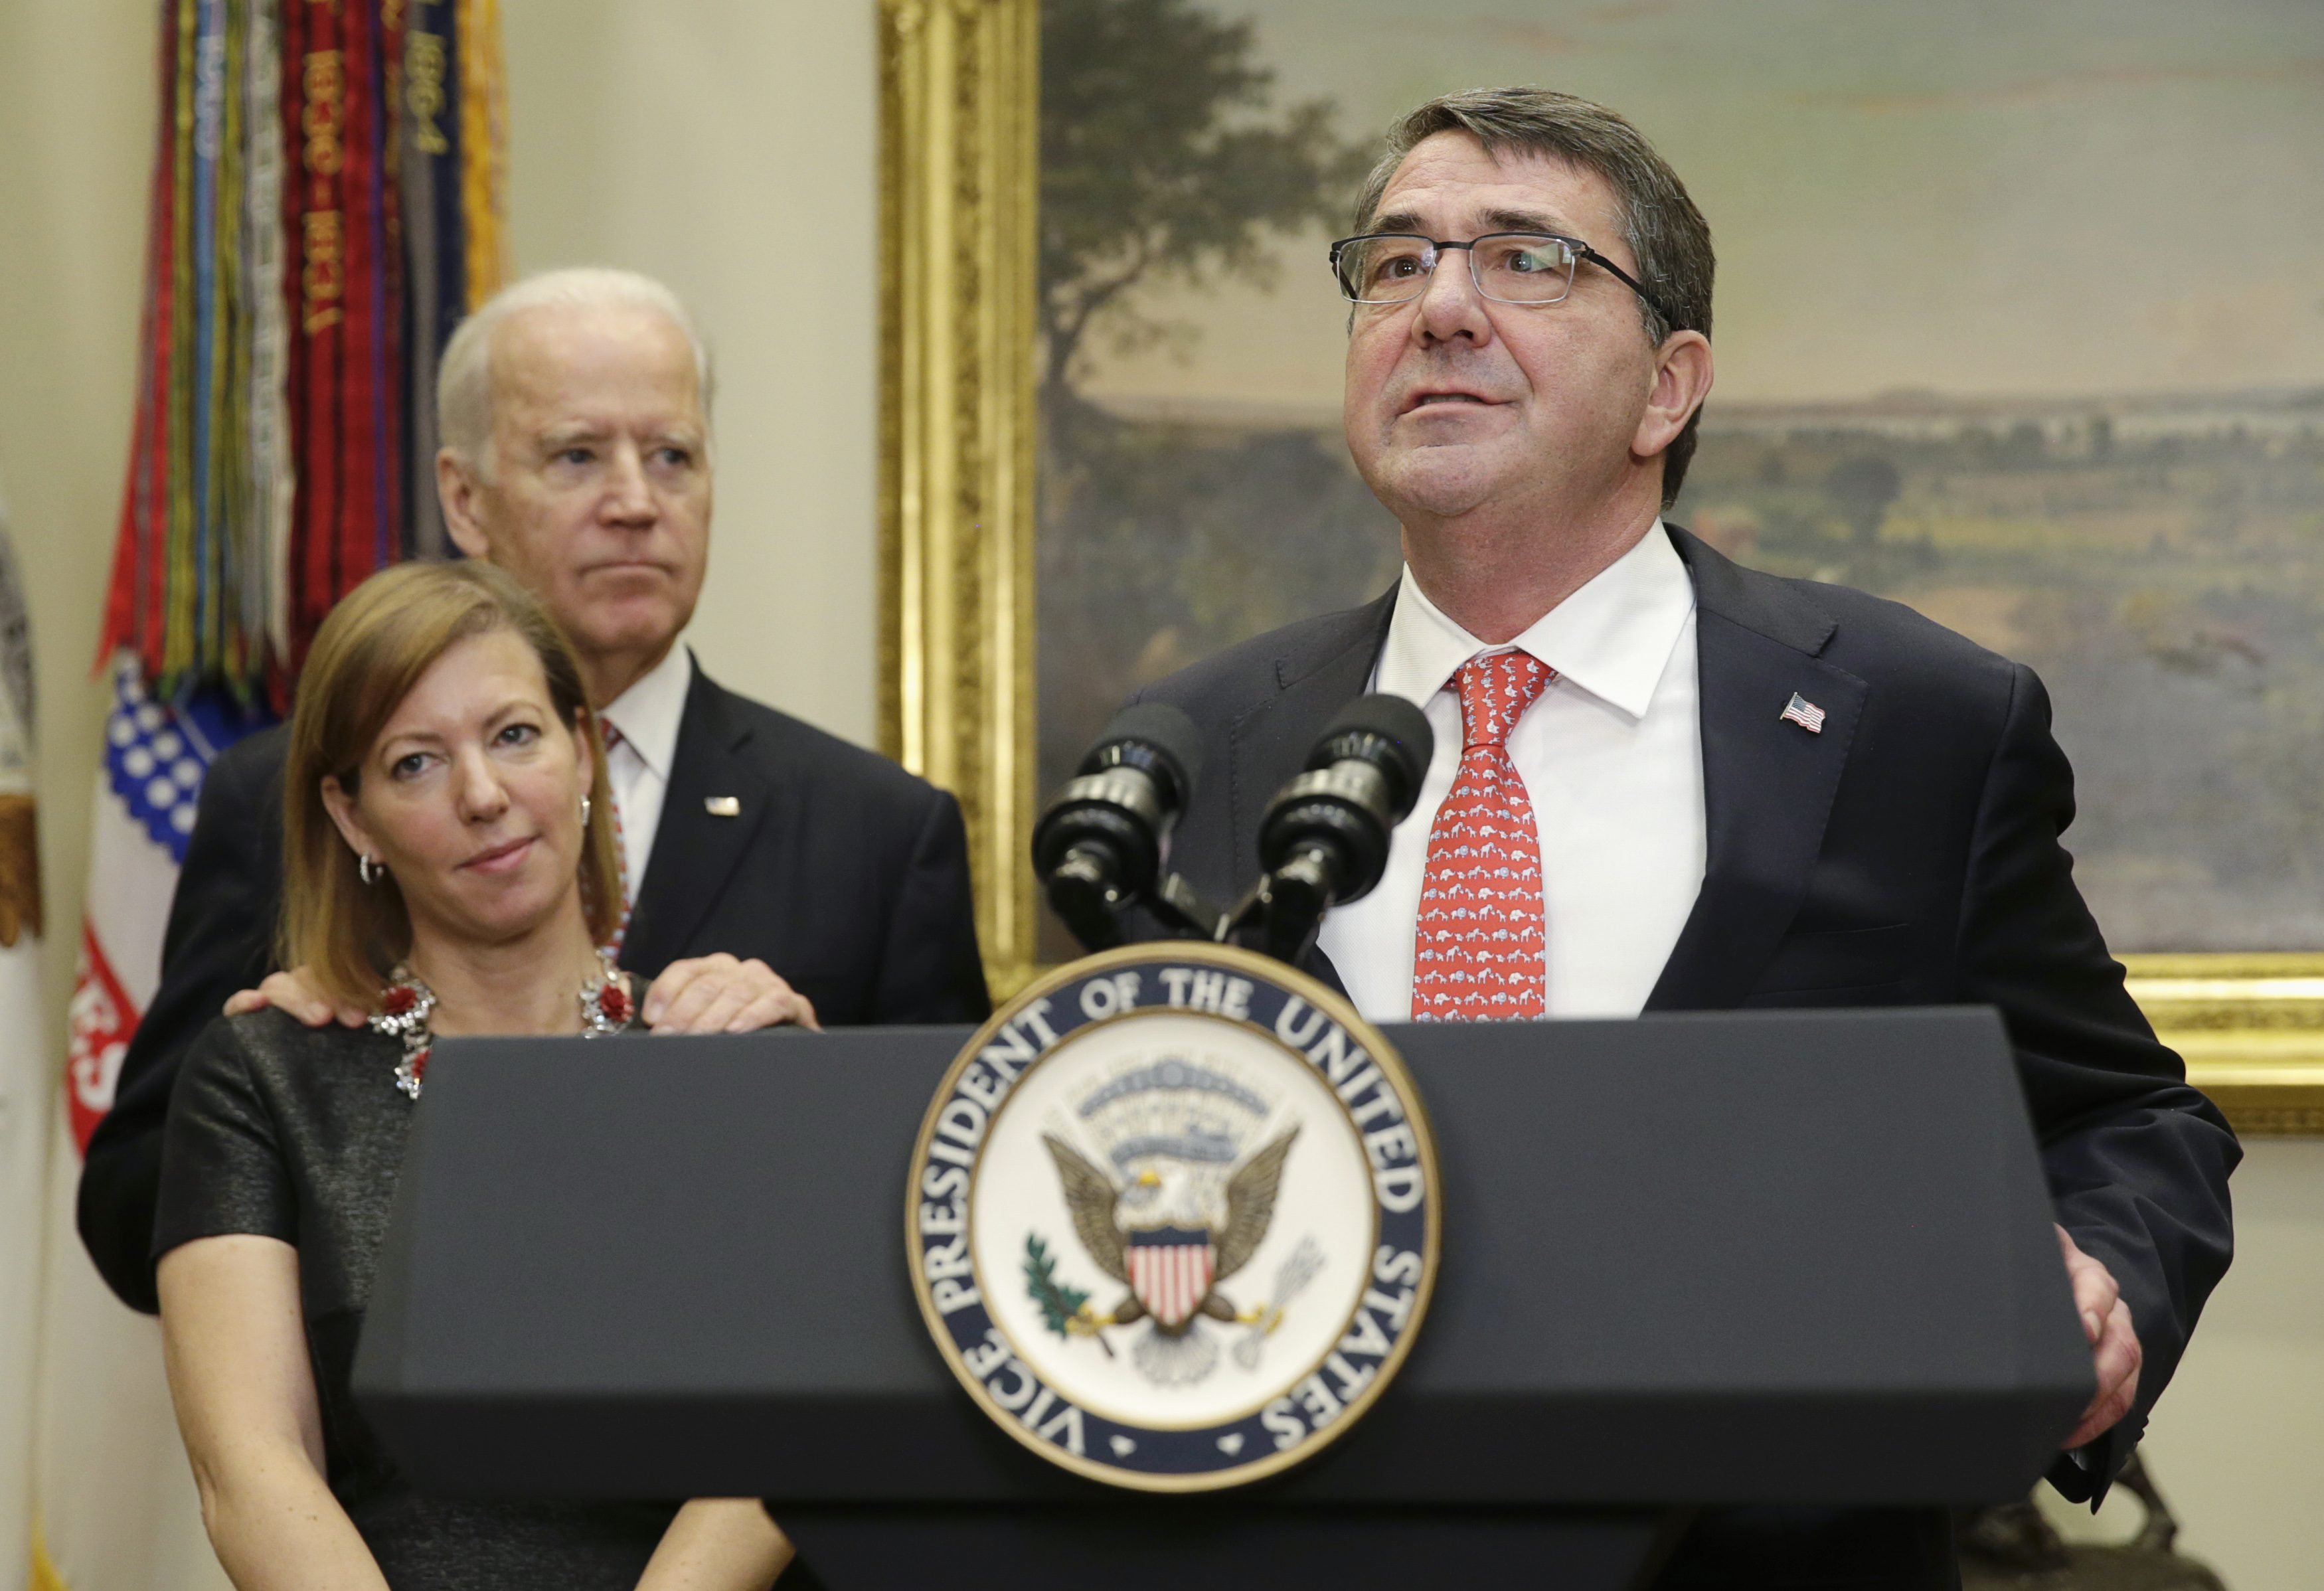 New U.S. Secretary of Defense Ash Carter delivers his acceptance speech at the White House in Washington on Feb. 17, 2015. (Gary Cameron—Reuters)